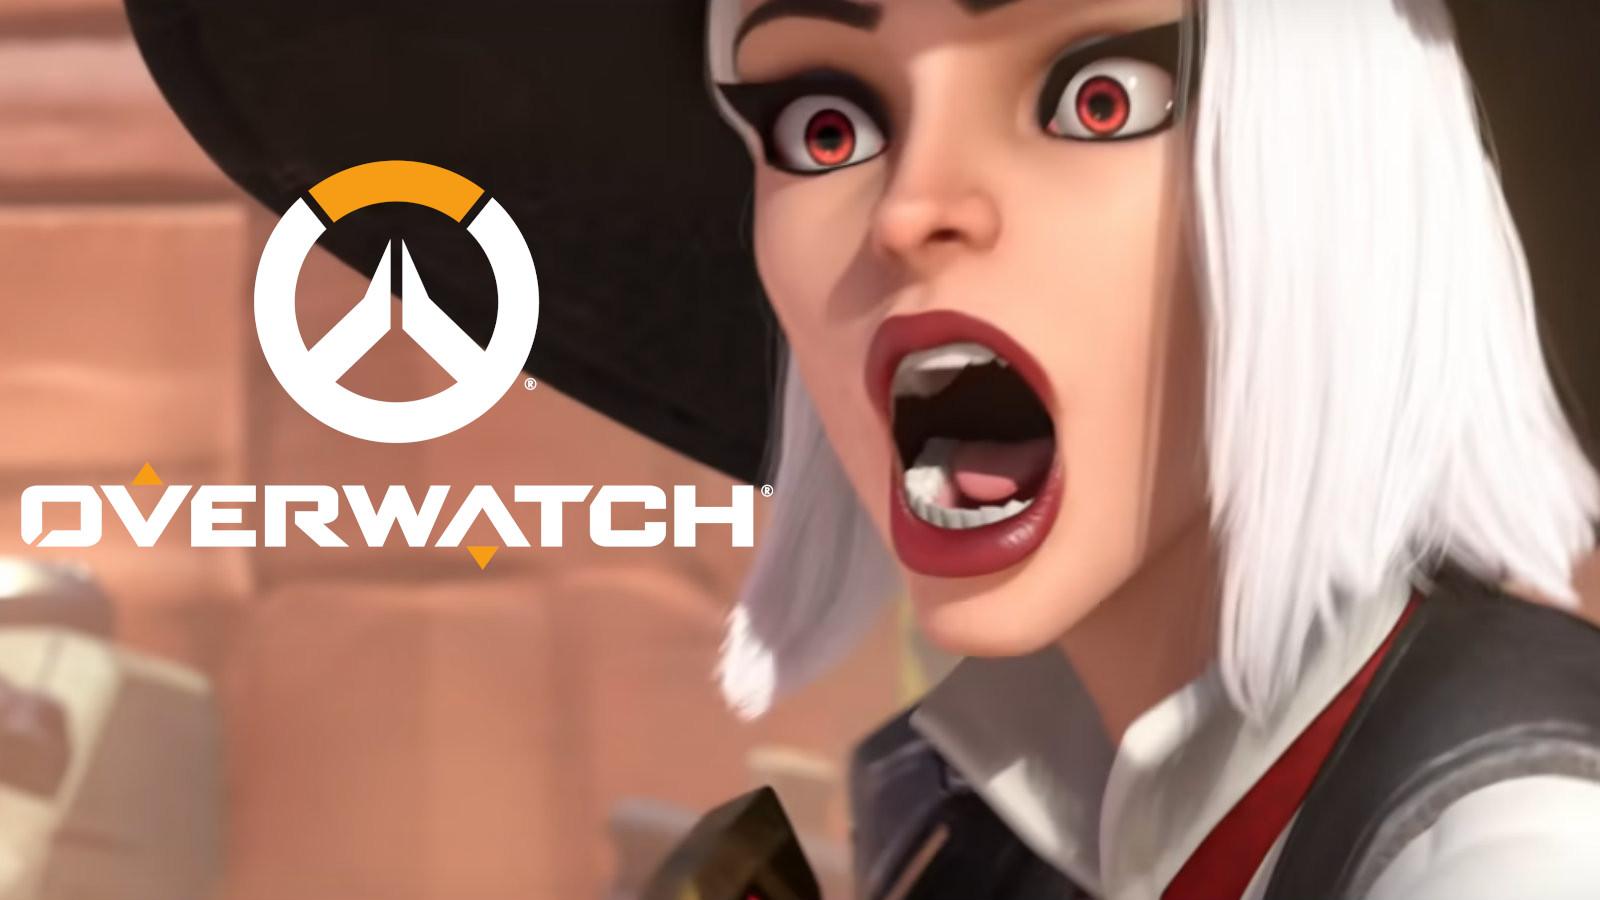 Ashe gasps in Overwatch